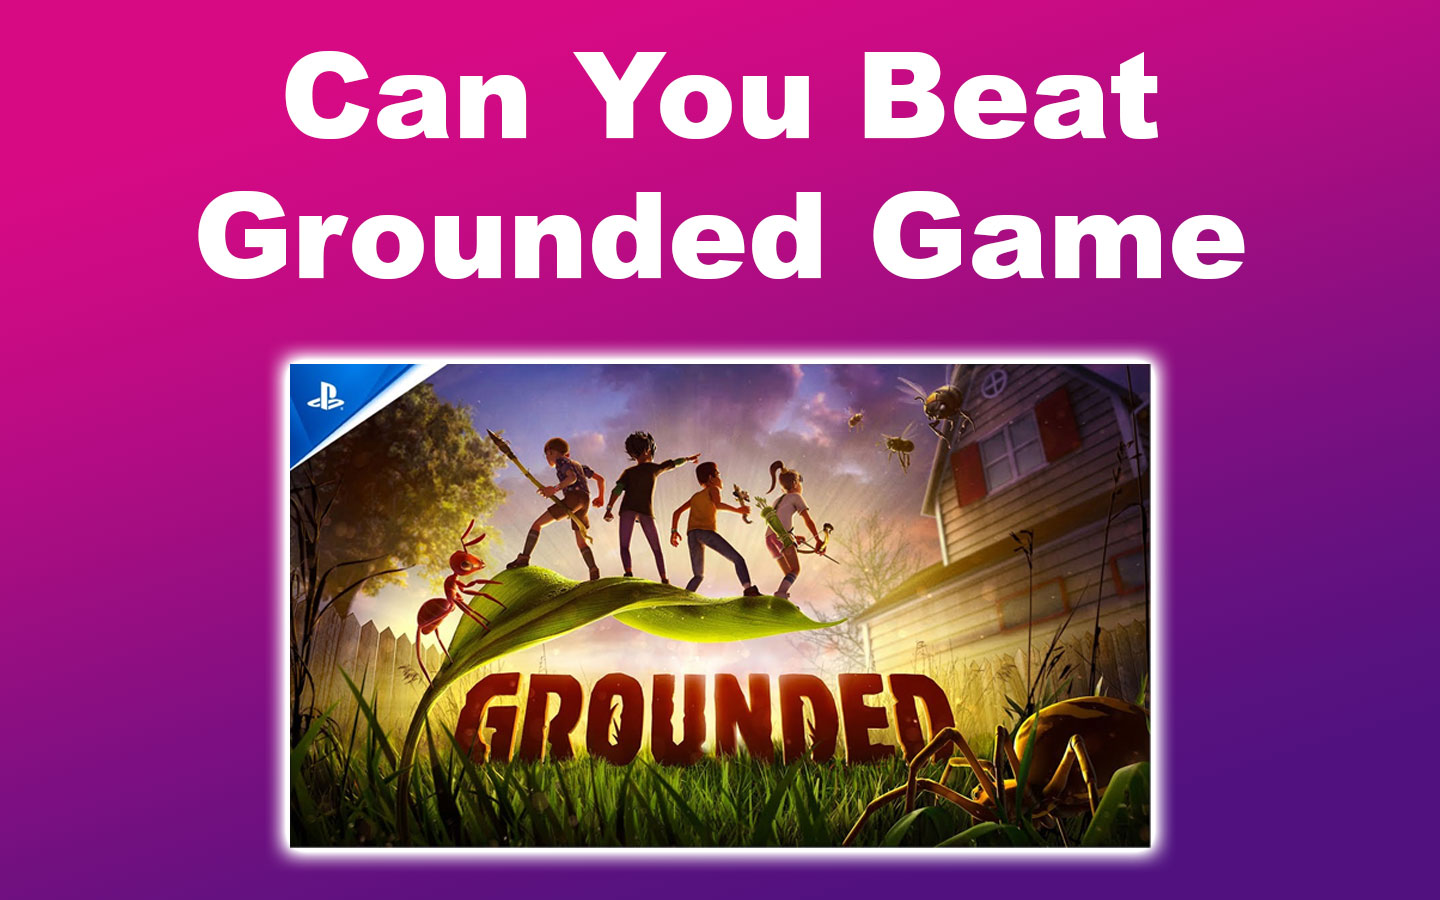 Can You Beat Grounded Game